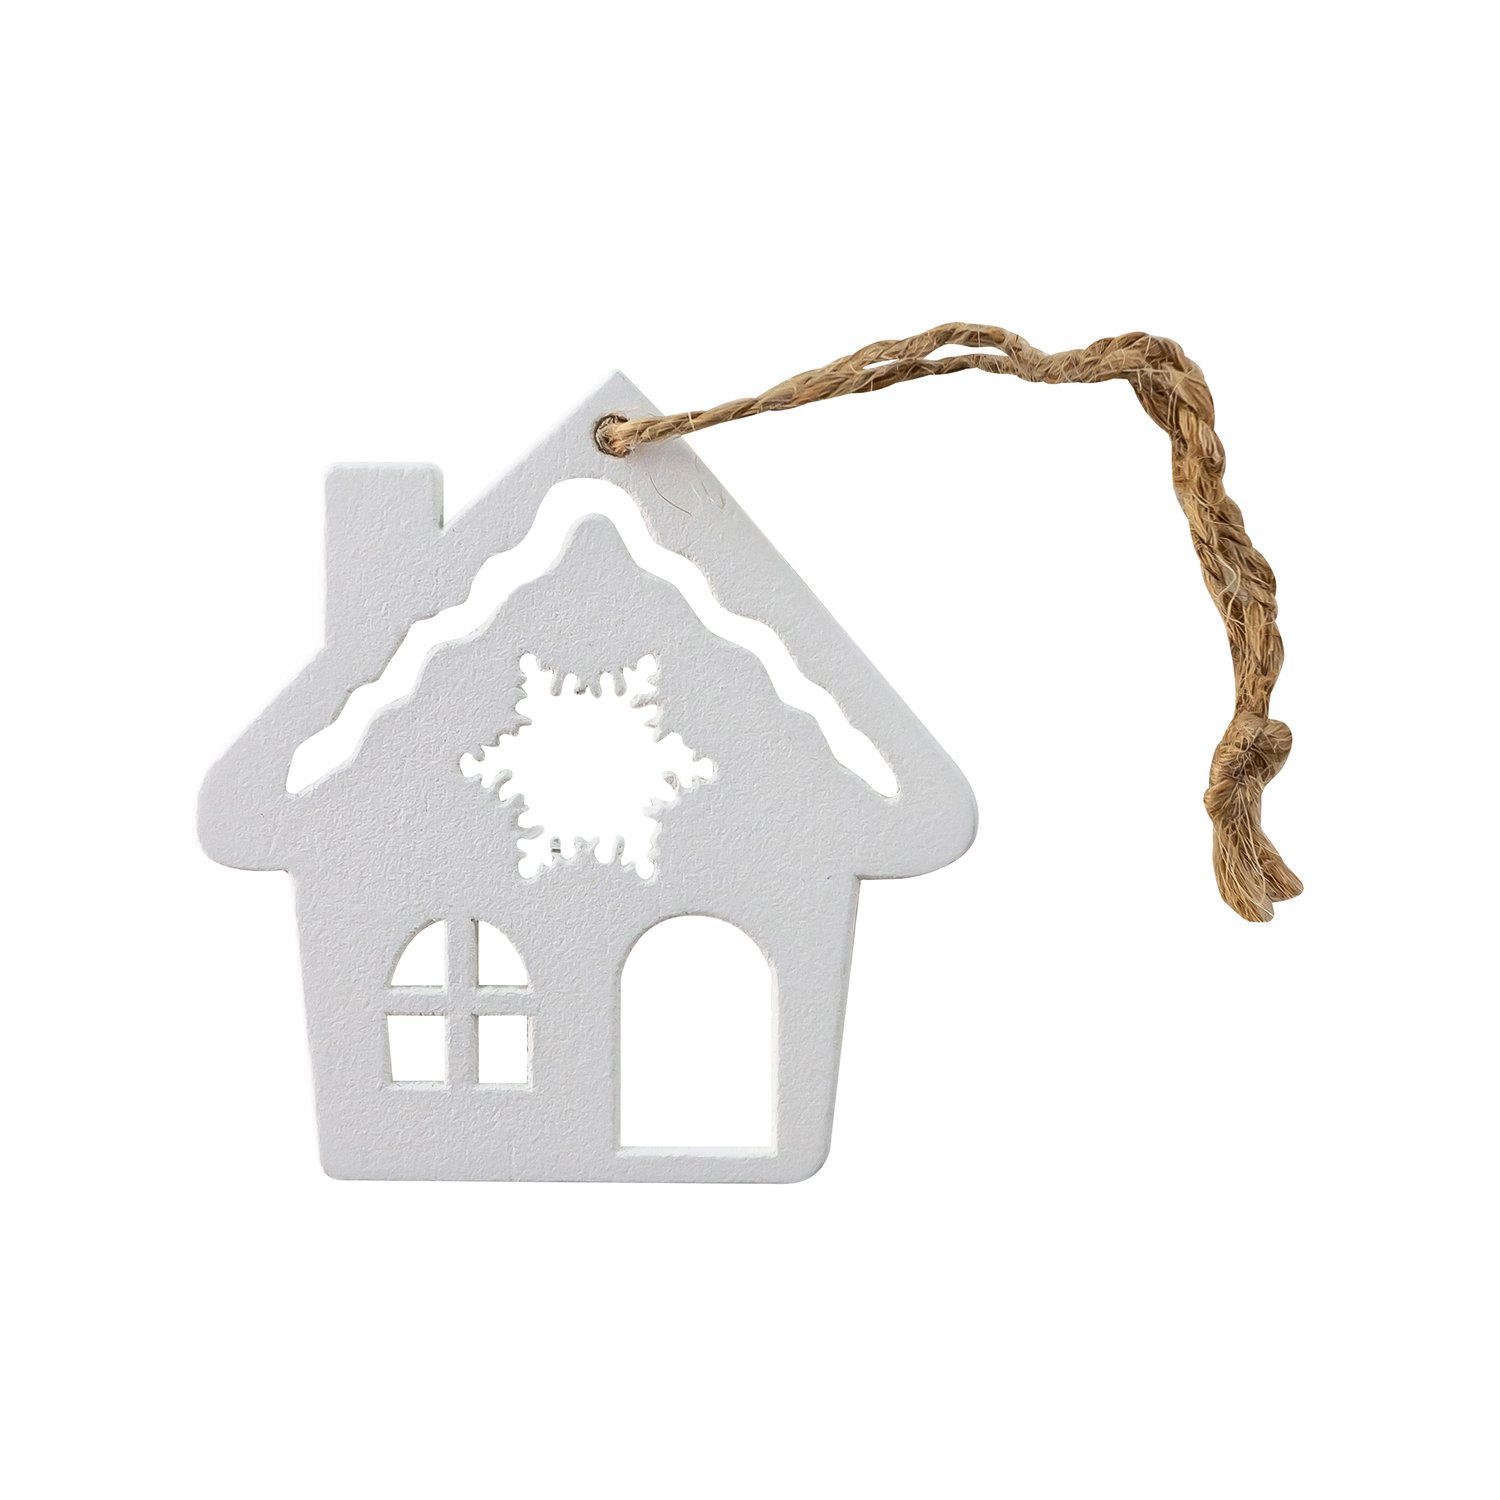 Wooden white house hanger with rope loop 5 x 4.8cm - 24xpcs